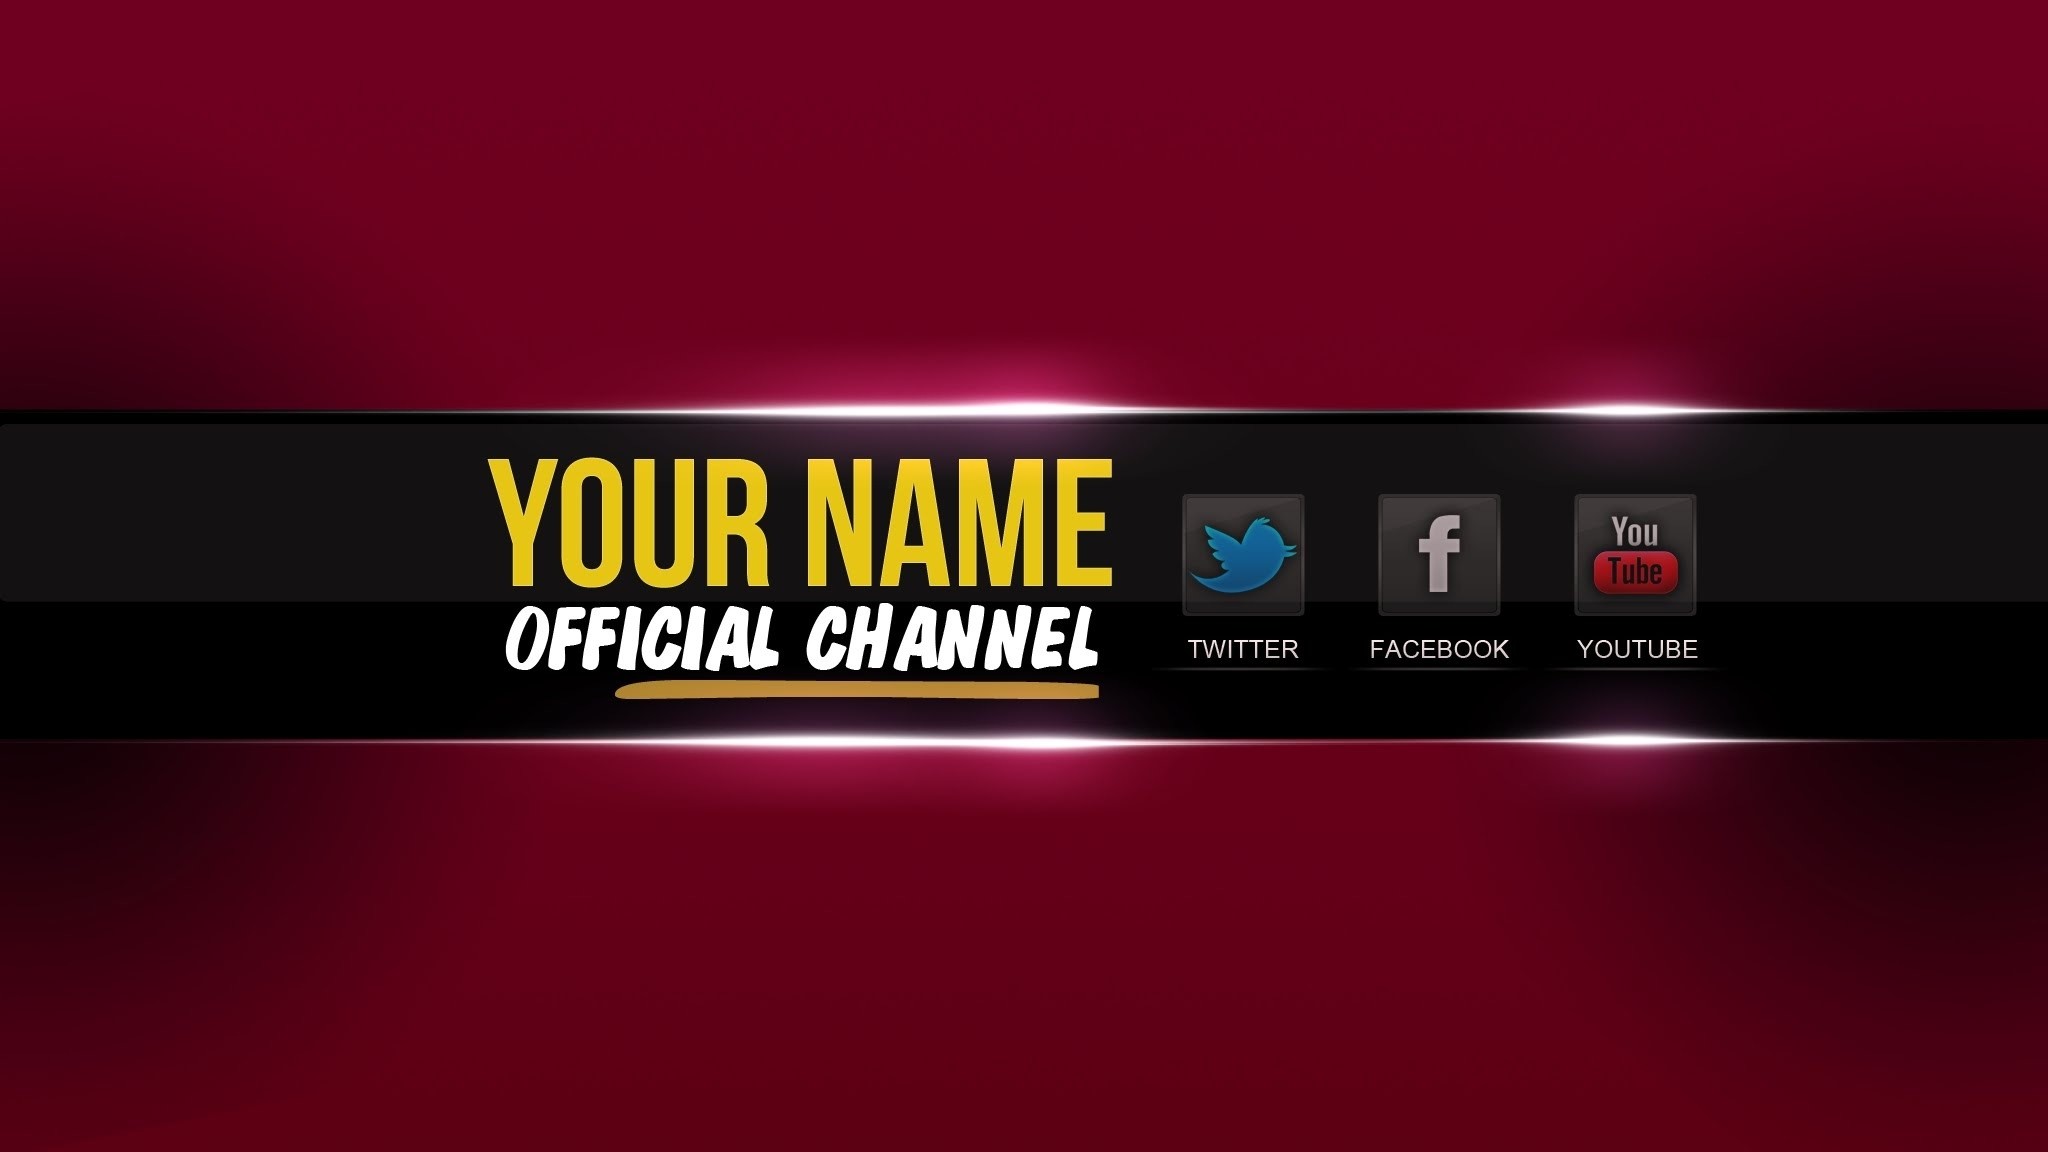 2048x1152 Youtube Banner Template Psd | Cyberuse for Banner For Youtube 3991